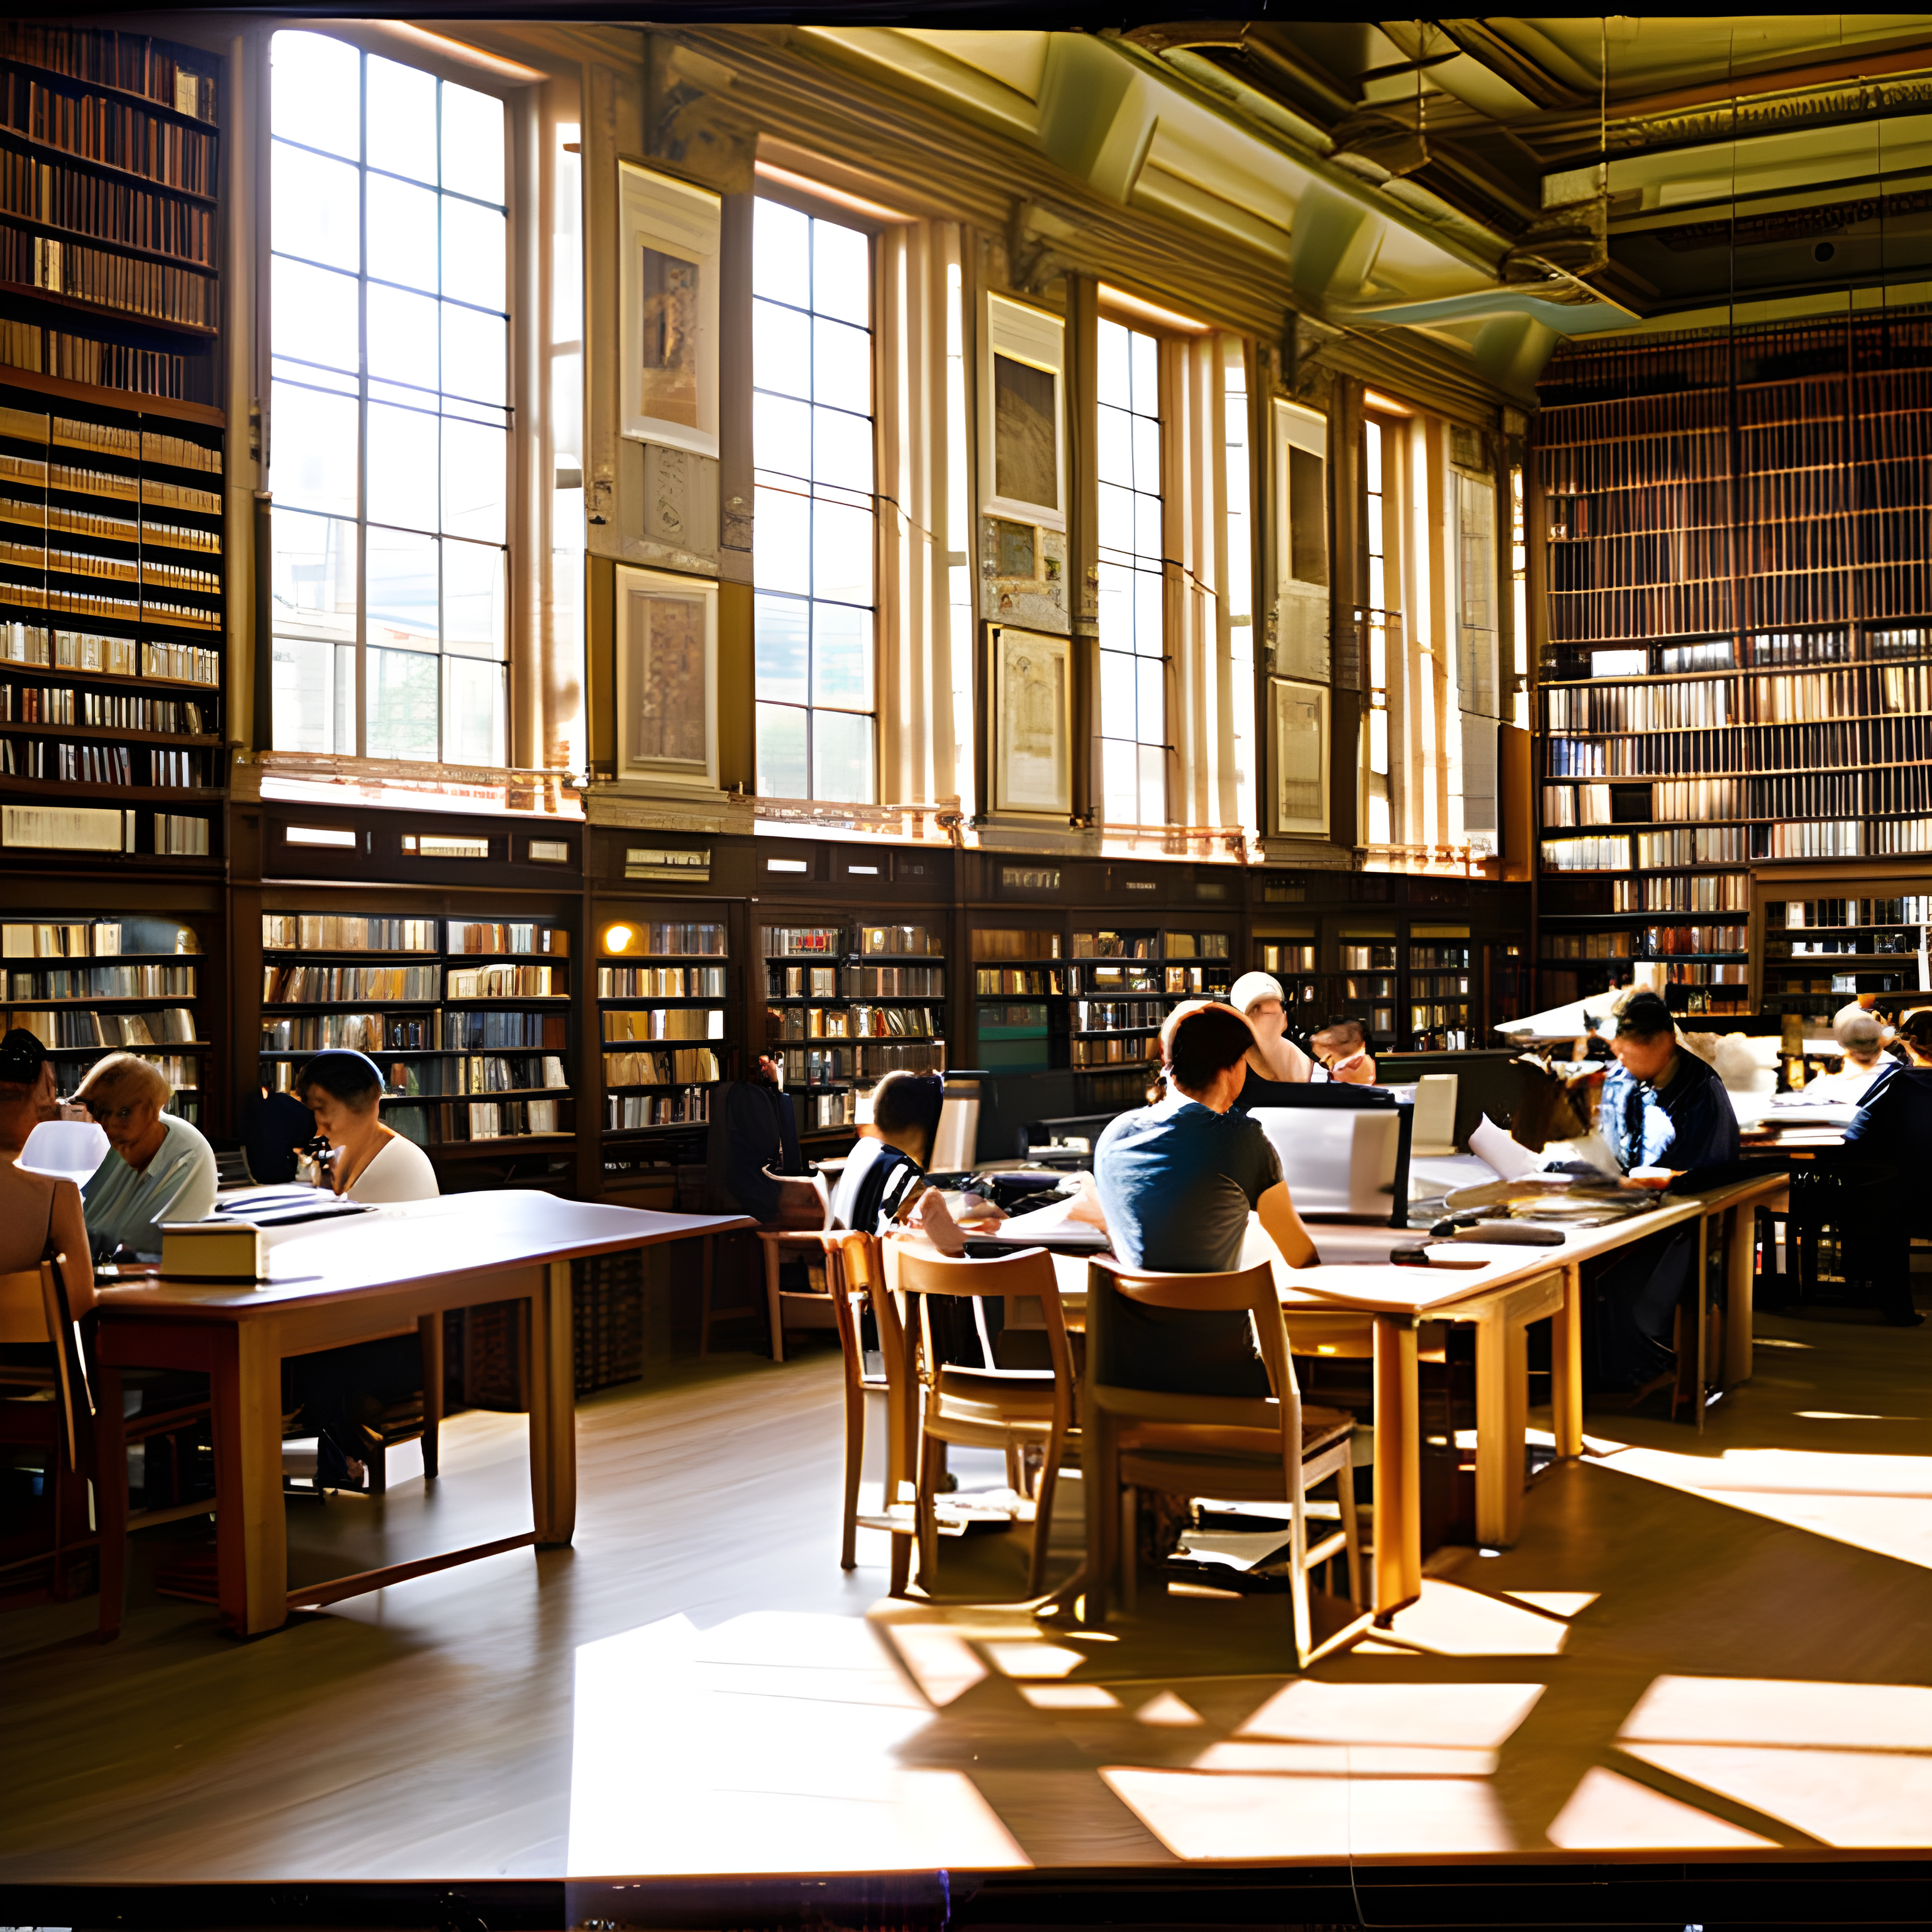 09_library-with-lots-of-books-bookshelves-some-people-in-light-clothes-summer-sunshine-through-wind-630424259